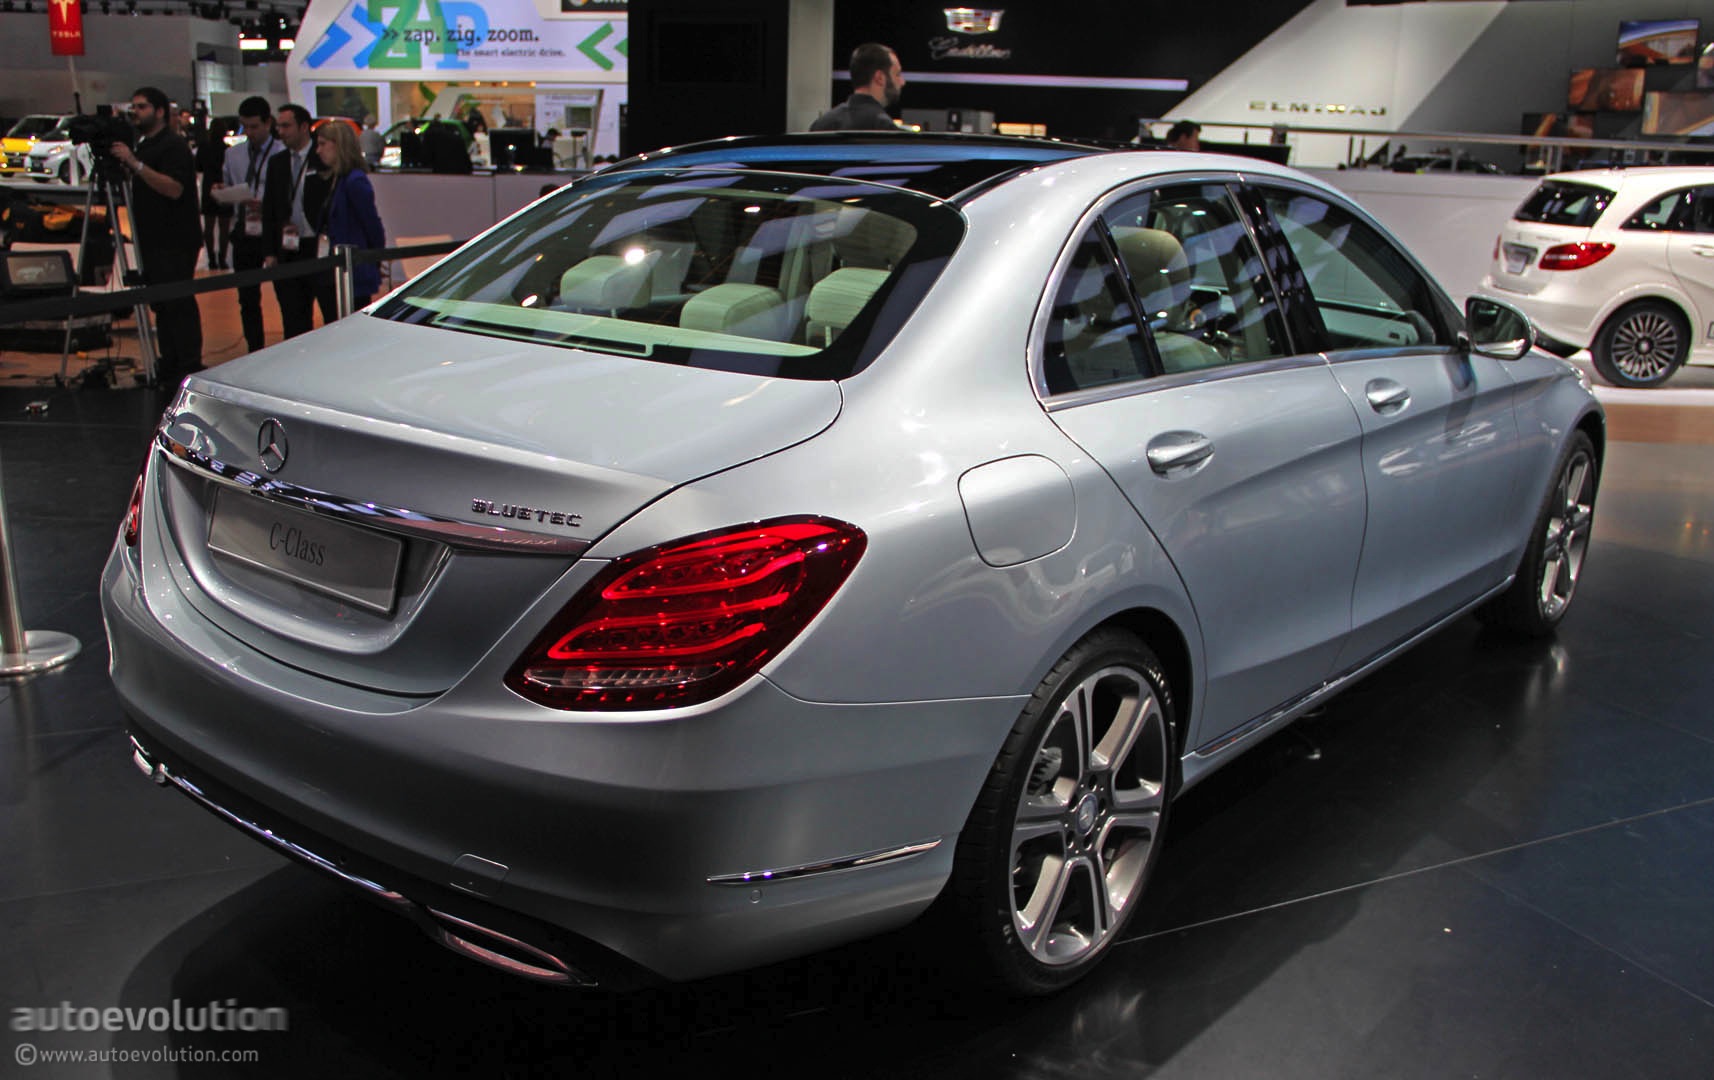 http://s1.cdn.autoevolution.com/images/news/gallery/2015-mercedes-c-class-takes-a-luxury-lead-in-detroit-live-photos_5.jpg?1389705059